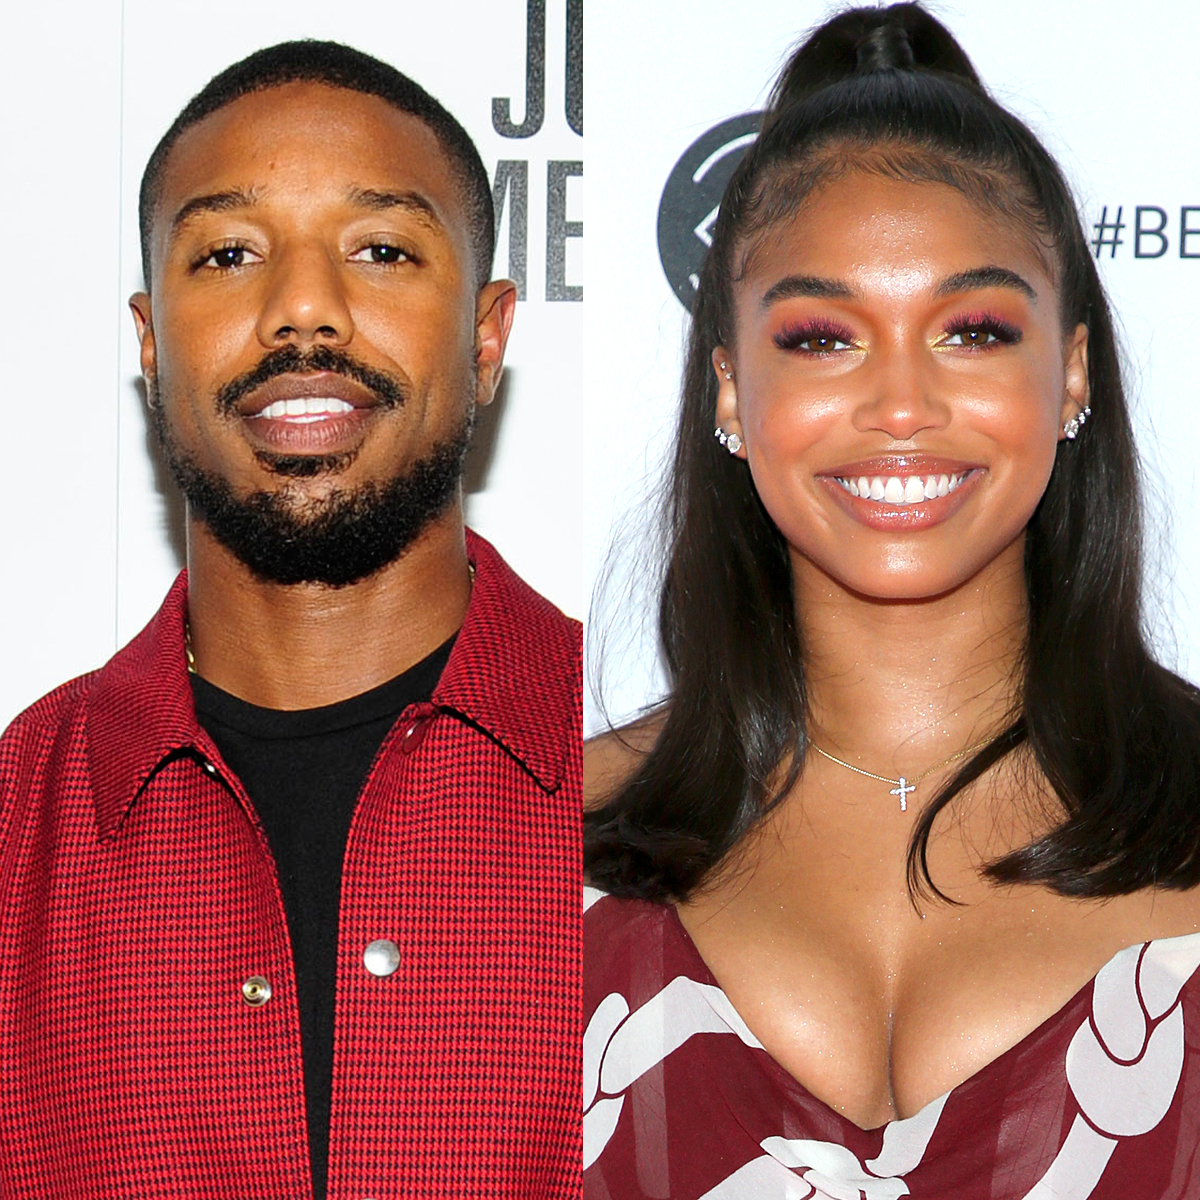 Michael B. Jordan and Lori Harvey holiday together over New Year